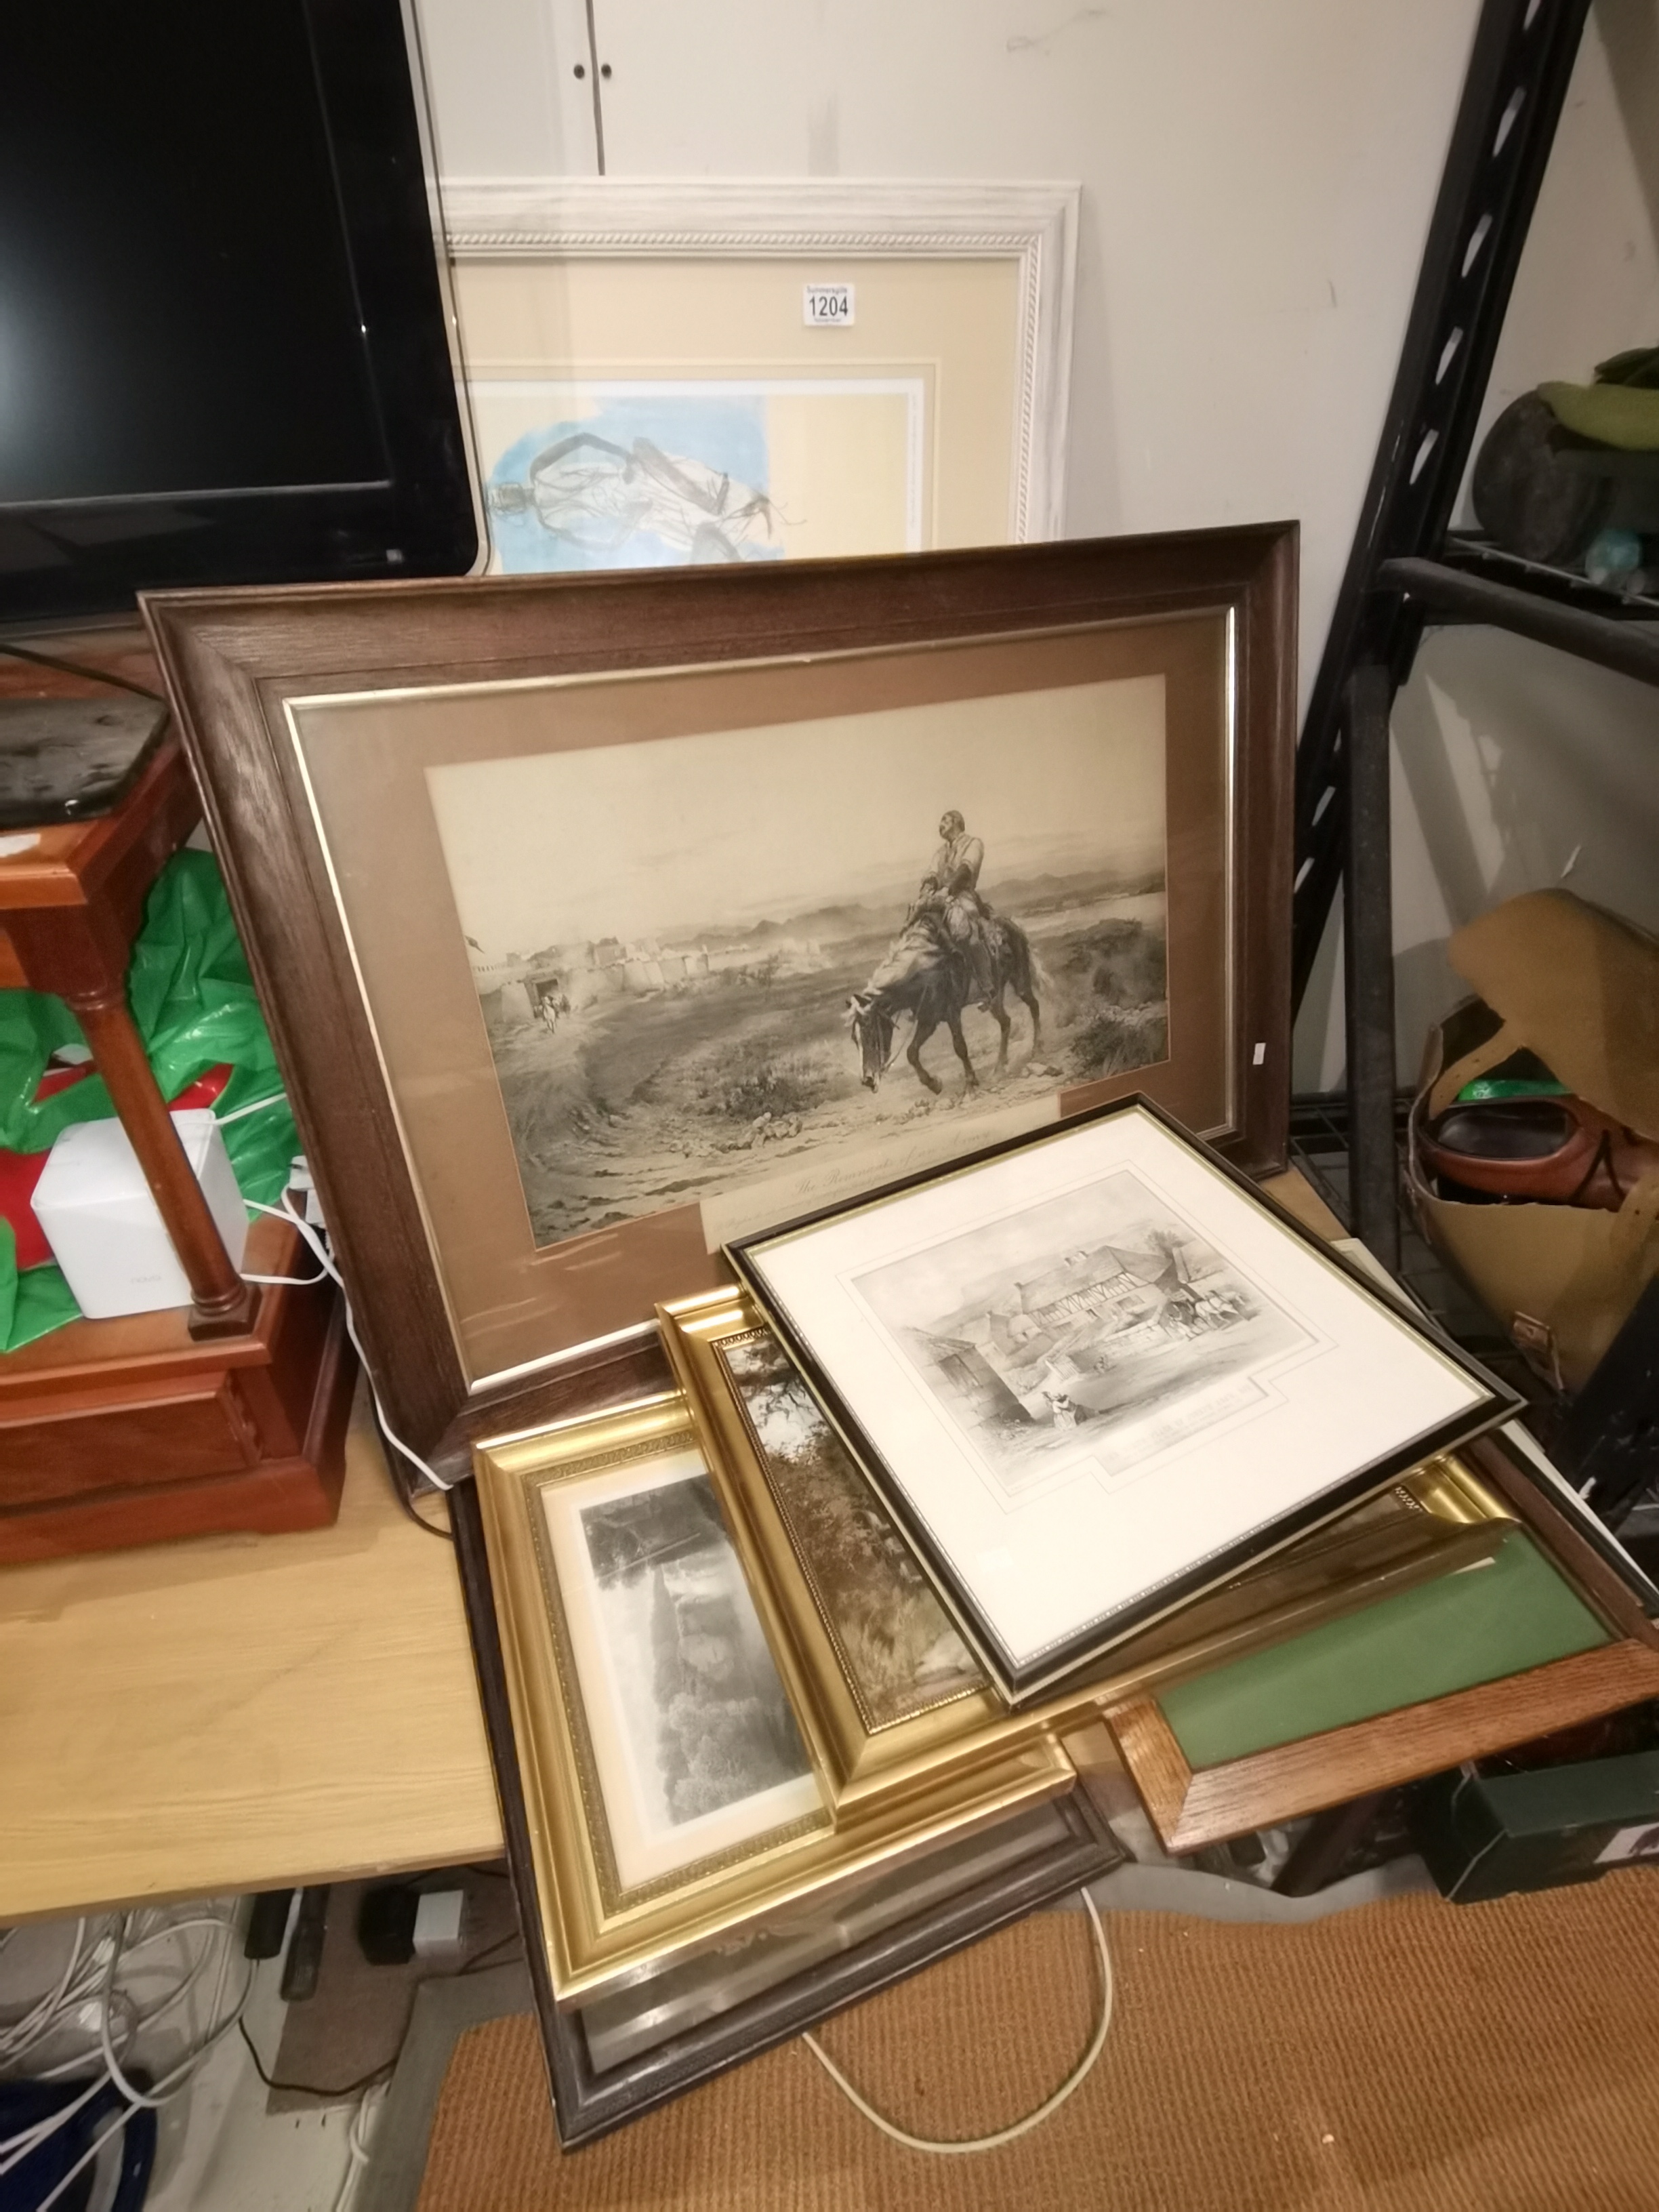 Antique framed mirror plus framed pictures, etchings, hunting scenes etc - Image 2 of 2